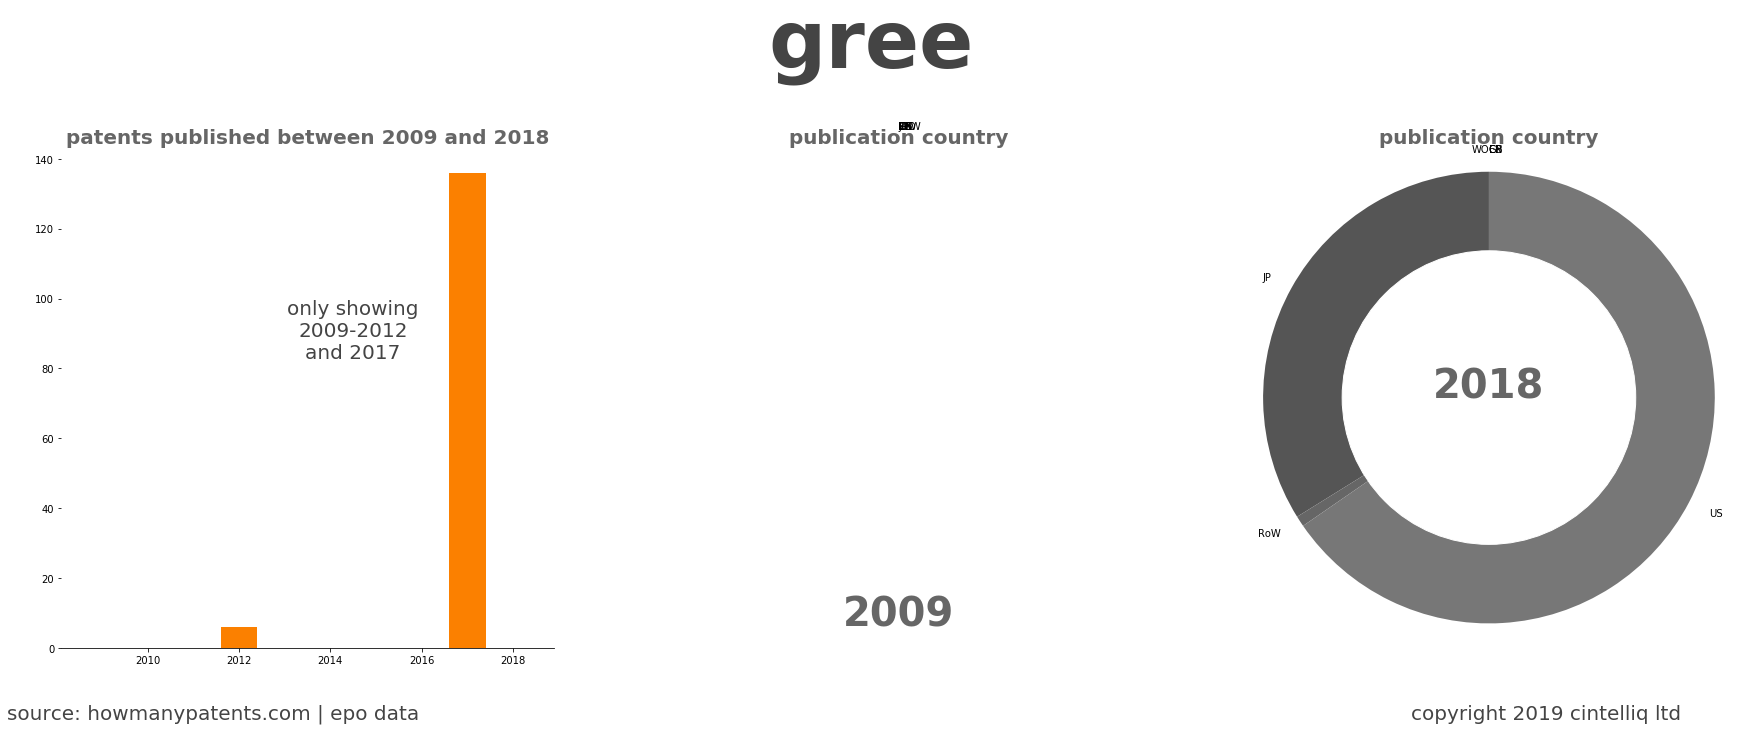 summary of patents for Gree